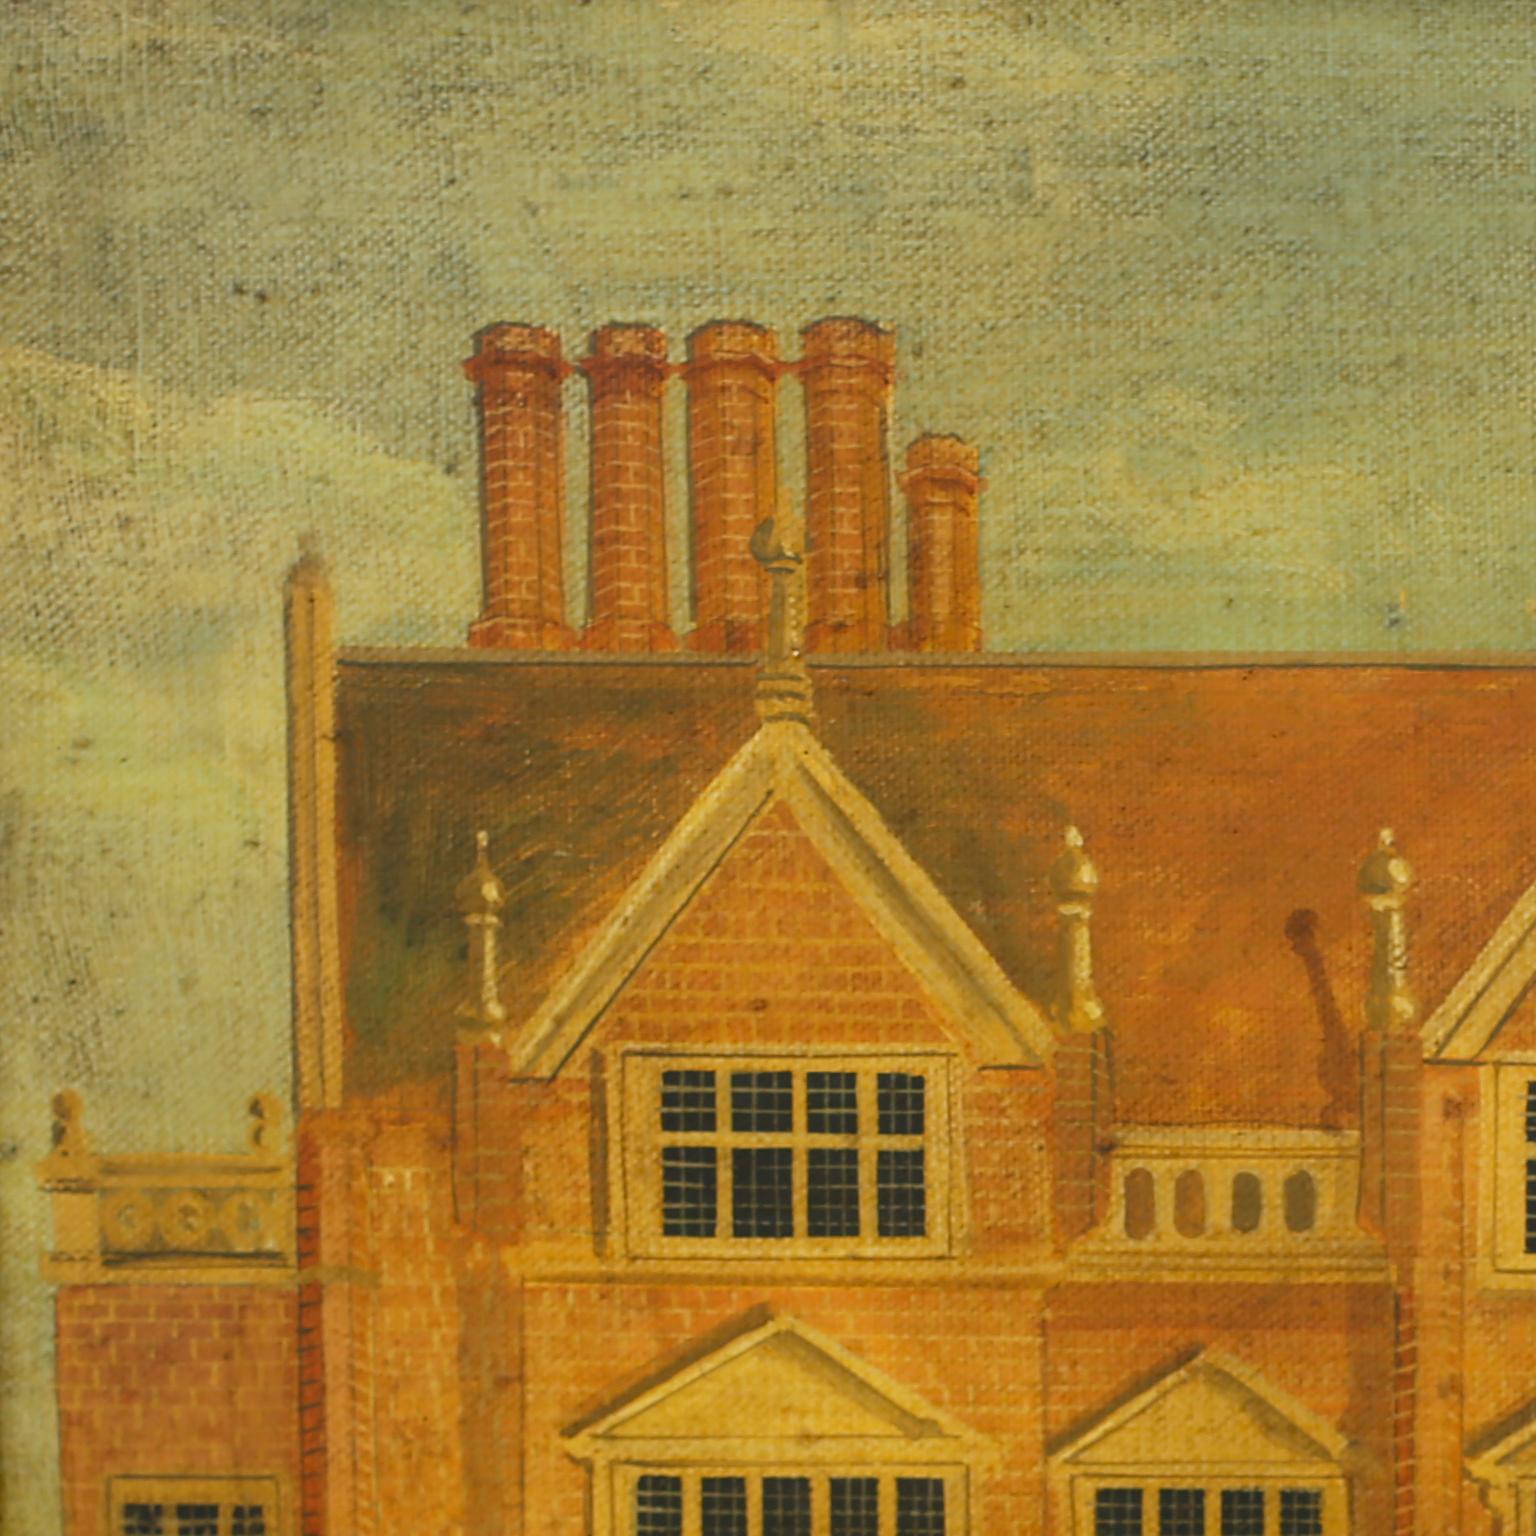 Architectural oil painting on canvas of Heydon Hall executed in a rustic naive style with contrived aging and presented in a maple frame. Signed Dan Dunton.